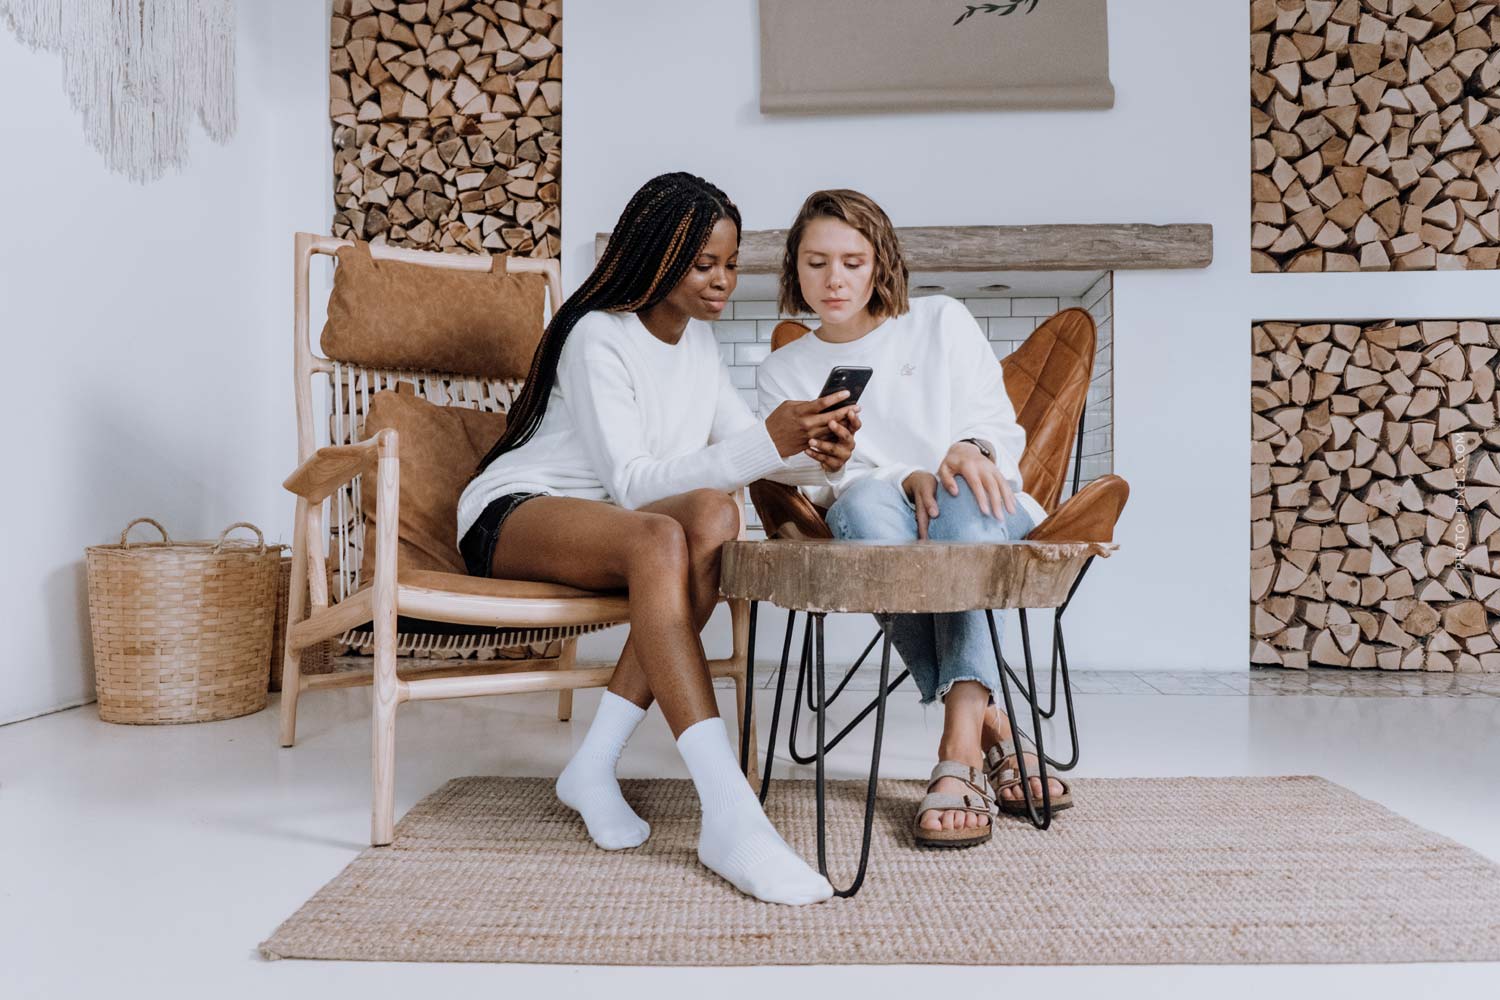 social-engagement-two-women-sitting-on-chairs-carpet-smartphone